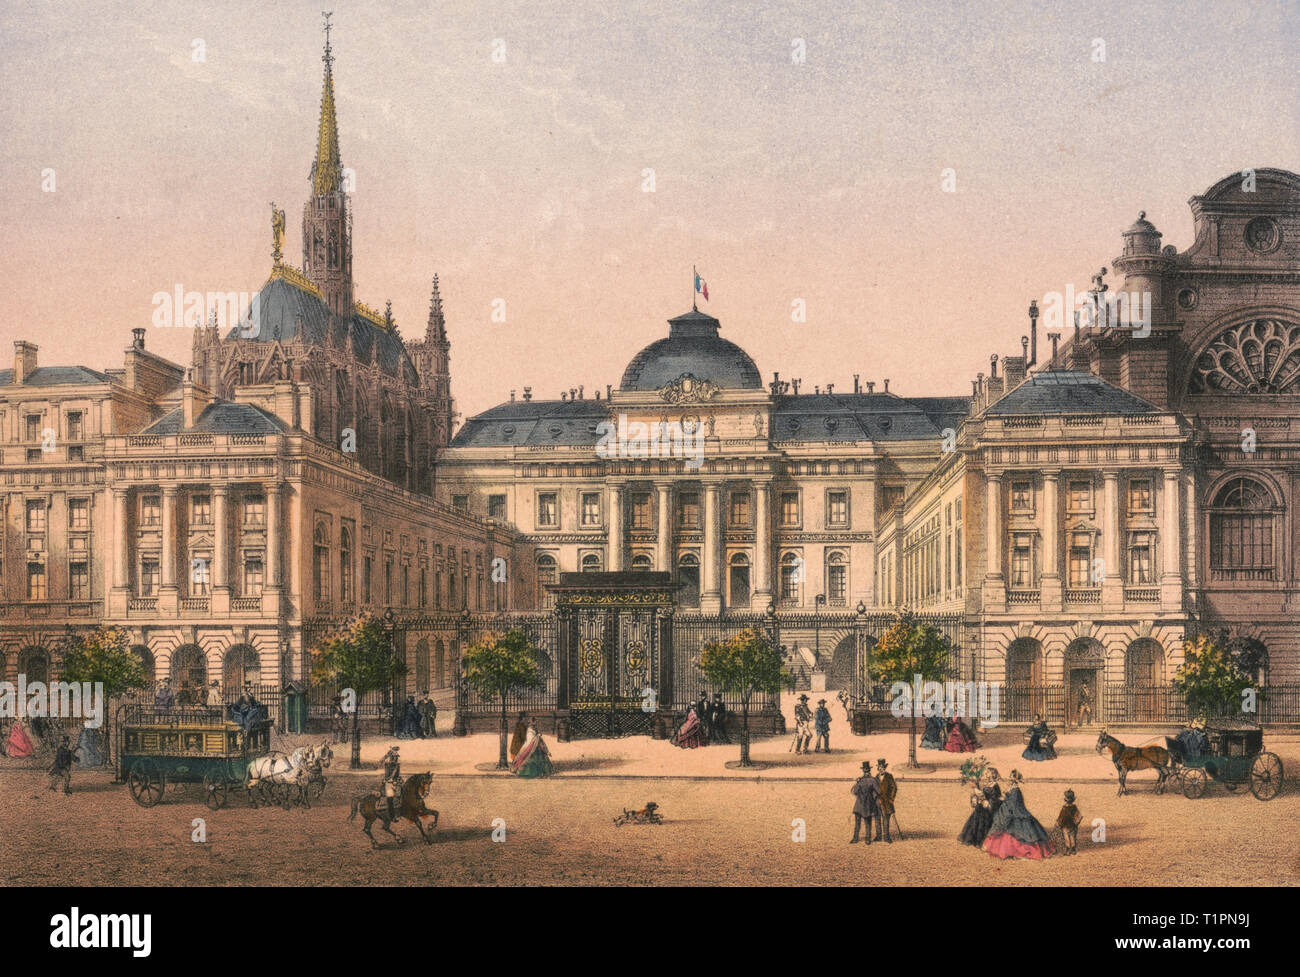 Paris. Palais de Justice et Ste. Chapelle - Print shows a street level view of the Palais de justice and Sainte-Chapelle, Paris, France, with pedestrians and coaches on the street in the foreground. Circa 1870 Stock Photo